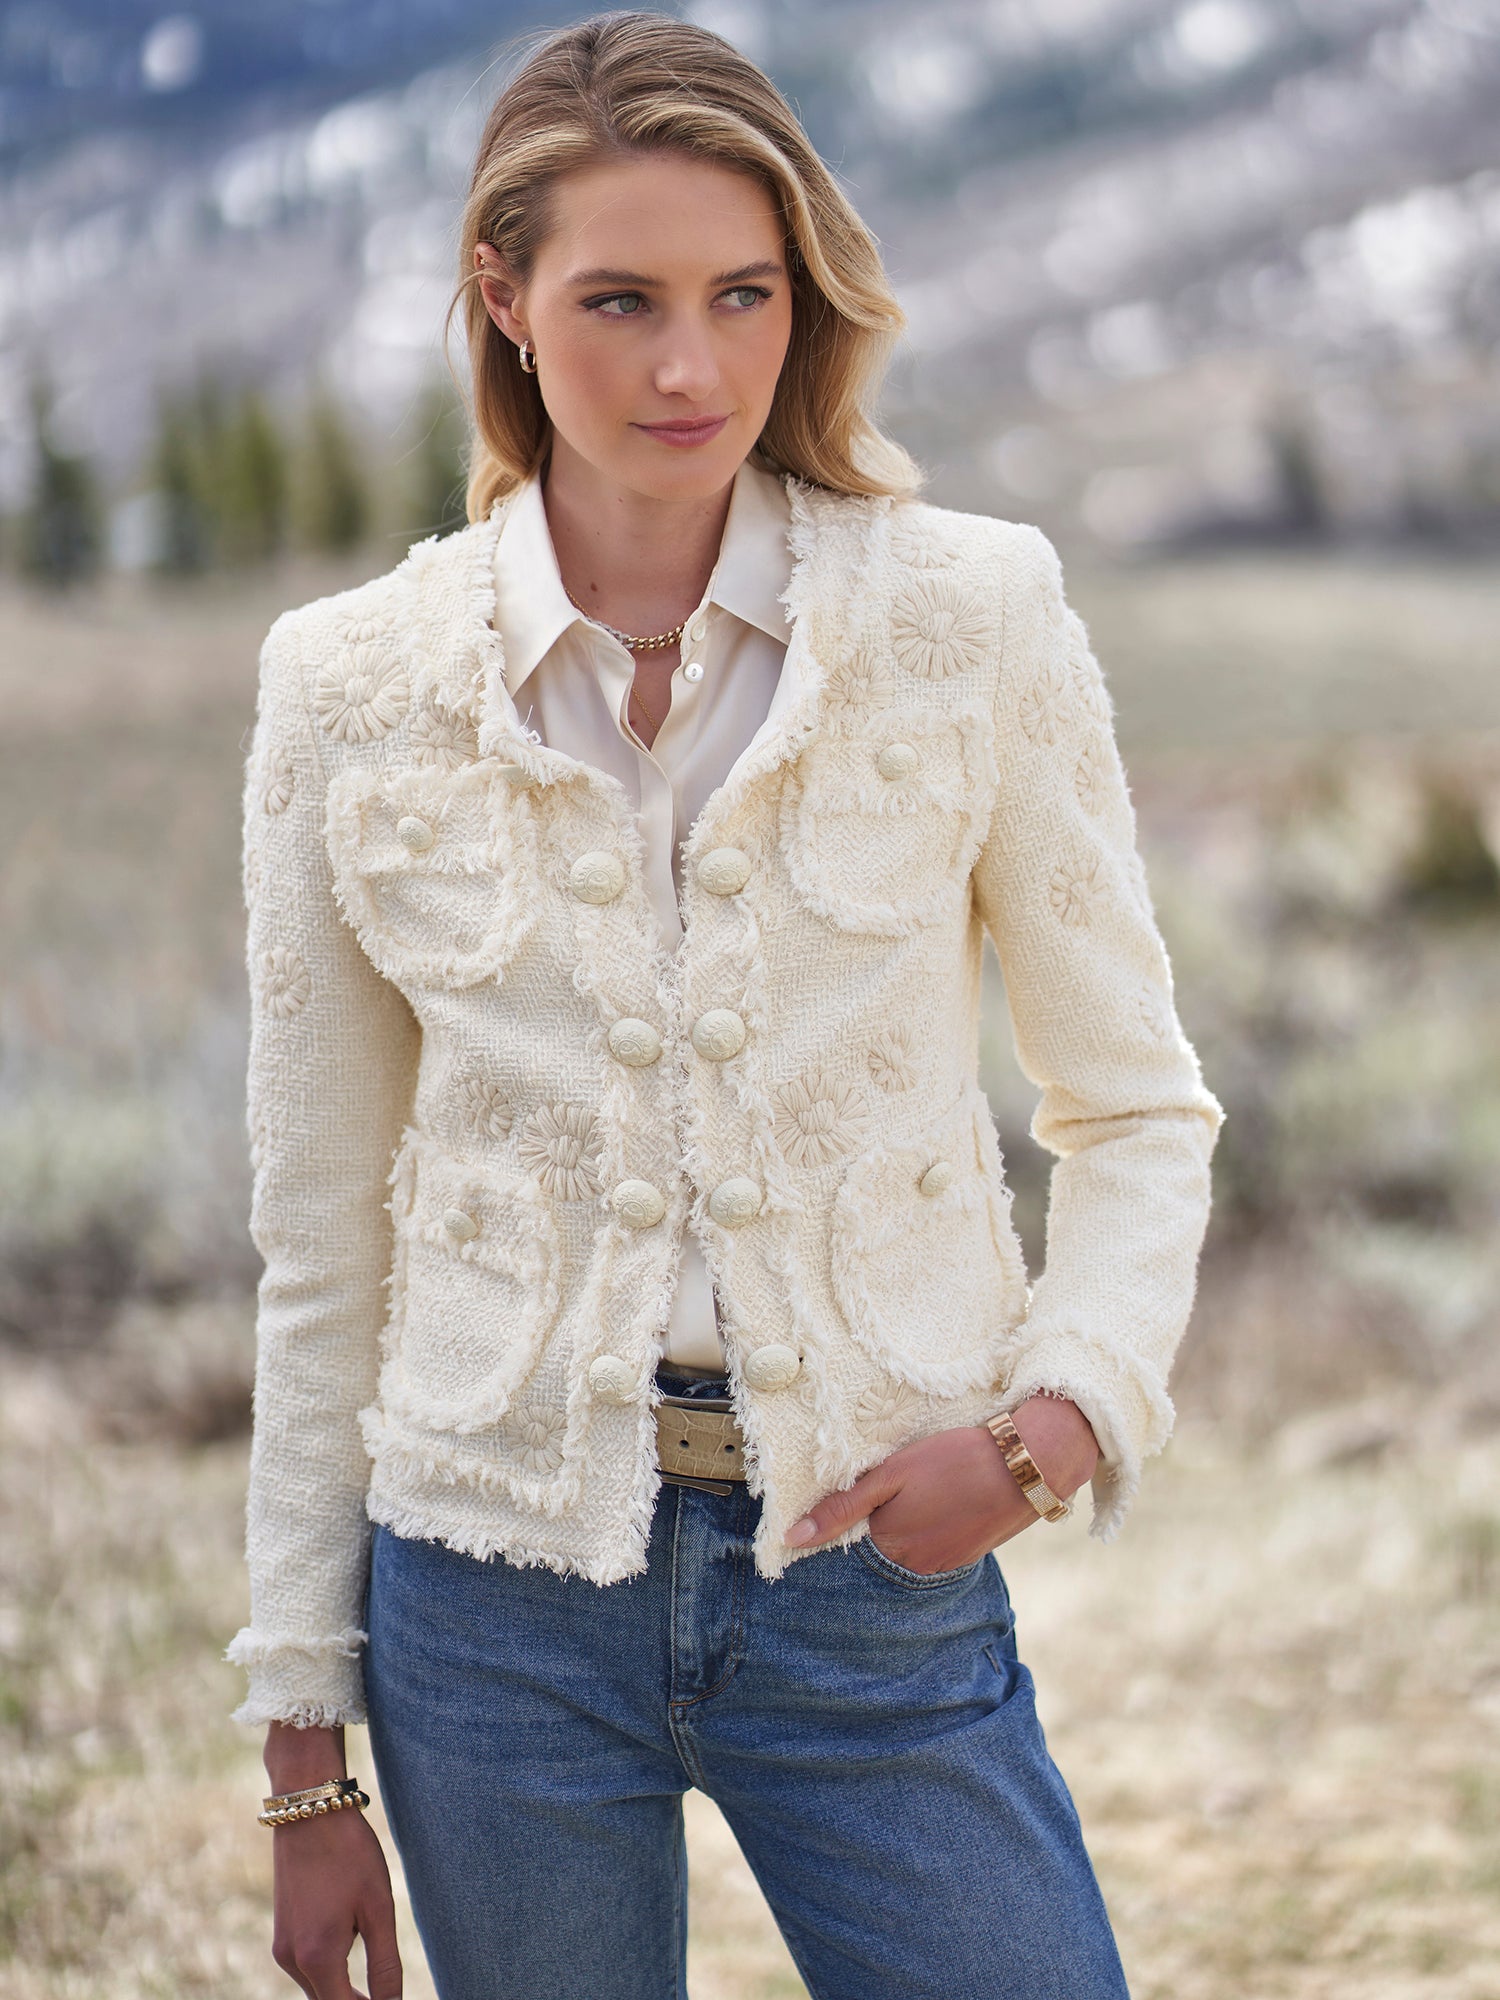 Chanel Edelweiss Knitted Cardigan